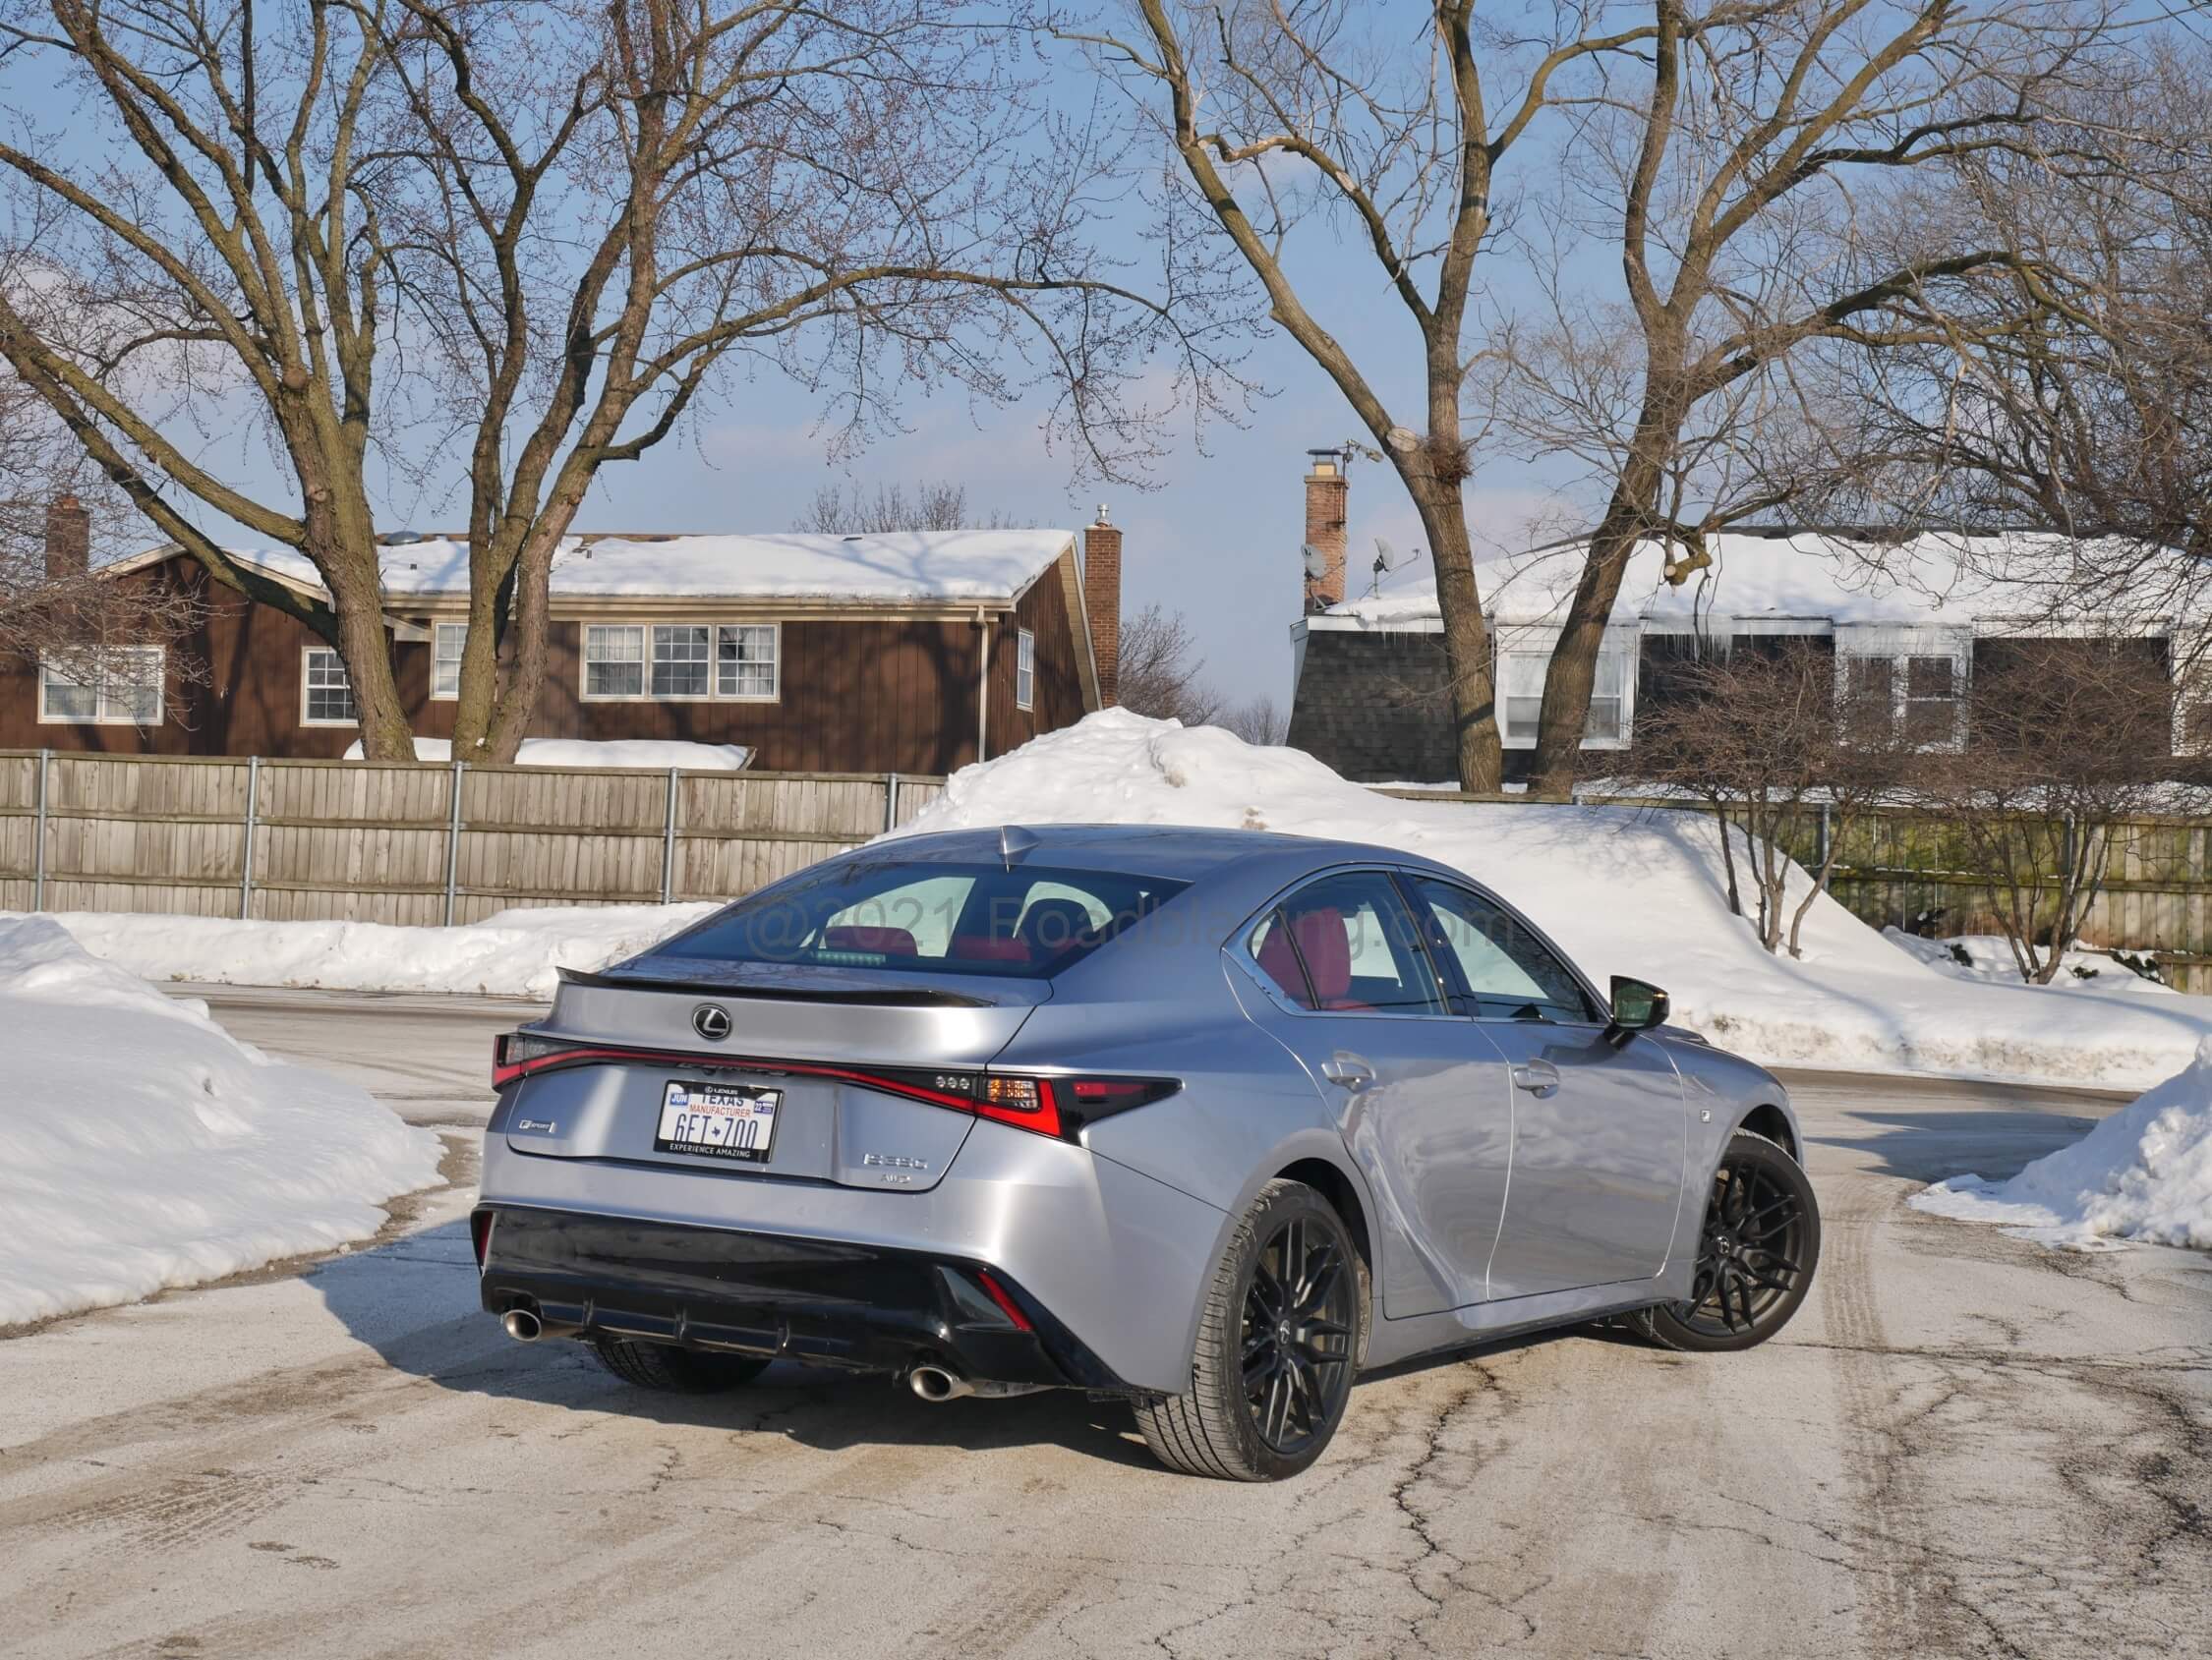 2021 Lexus IS 350 AWD: Bolder new rear door upswing body creasing + connecting lateral inverted "L" taillamps top styling updates